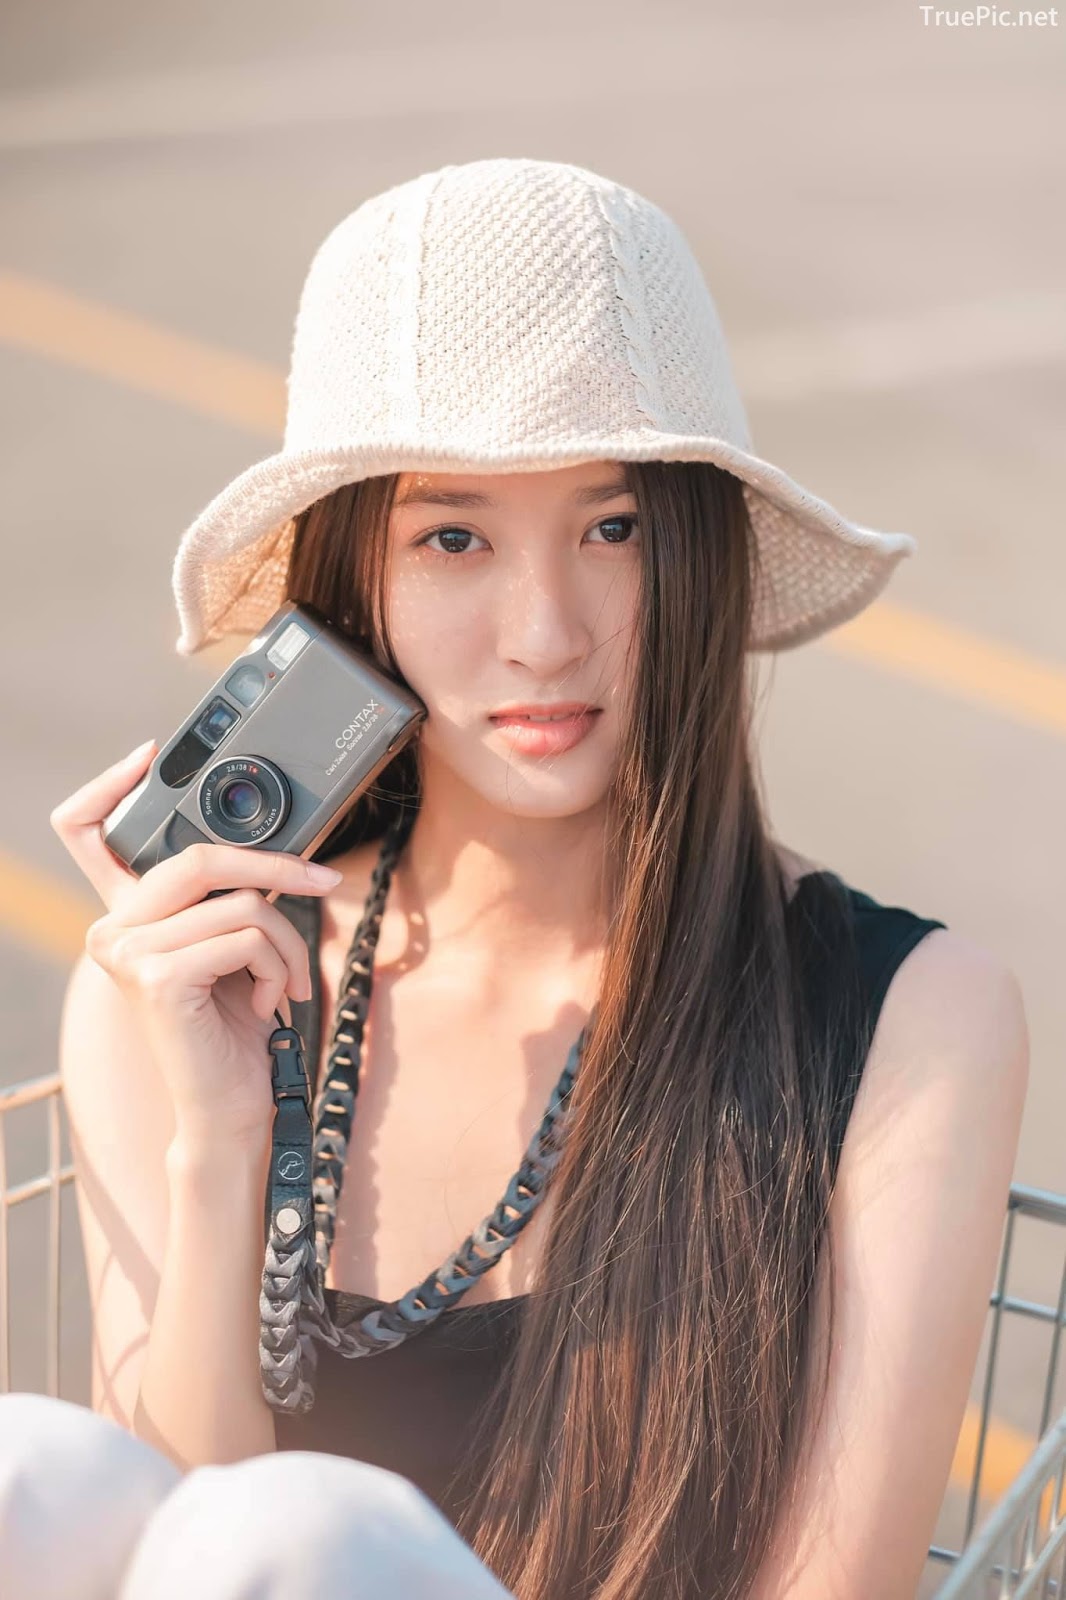 Thailand beauty model View Benyapa - One day practicing as a photographer - Picture 34